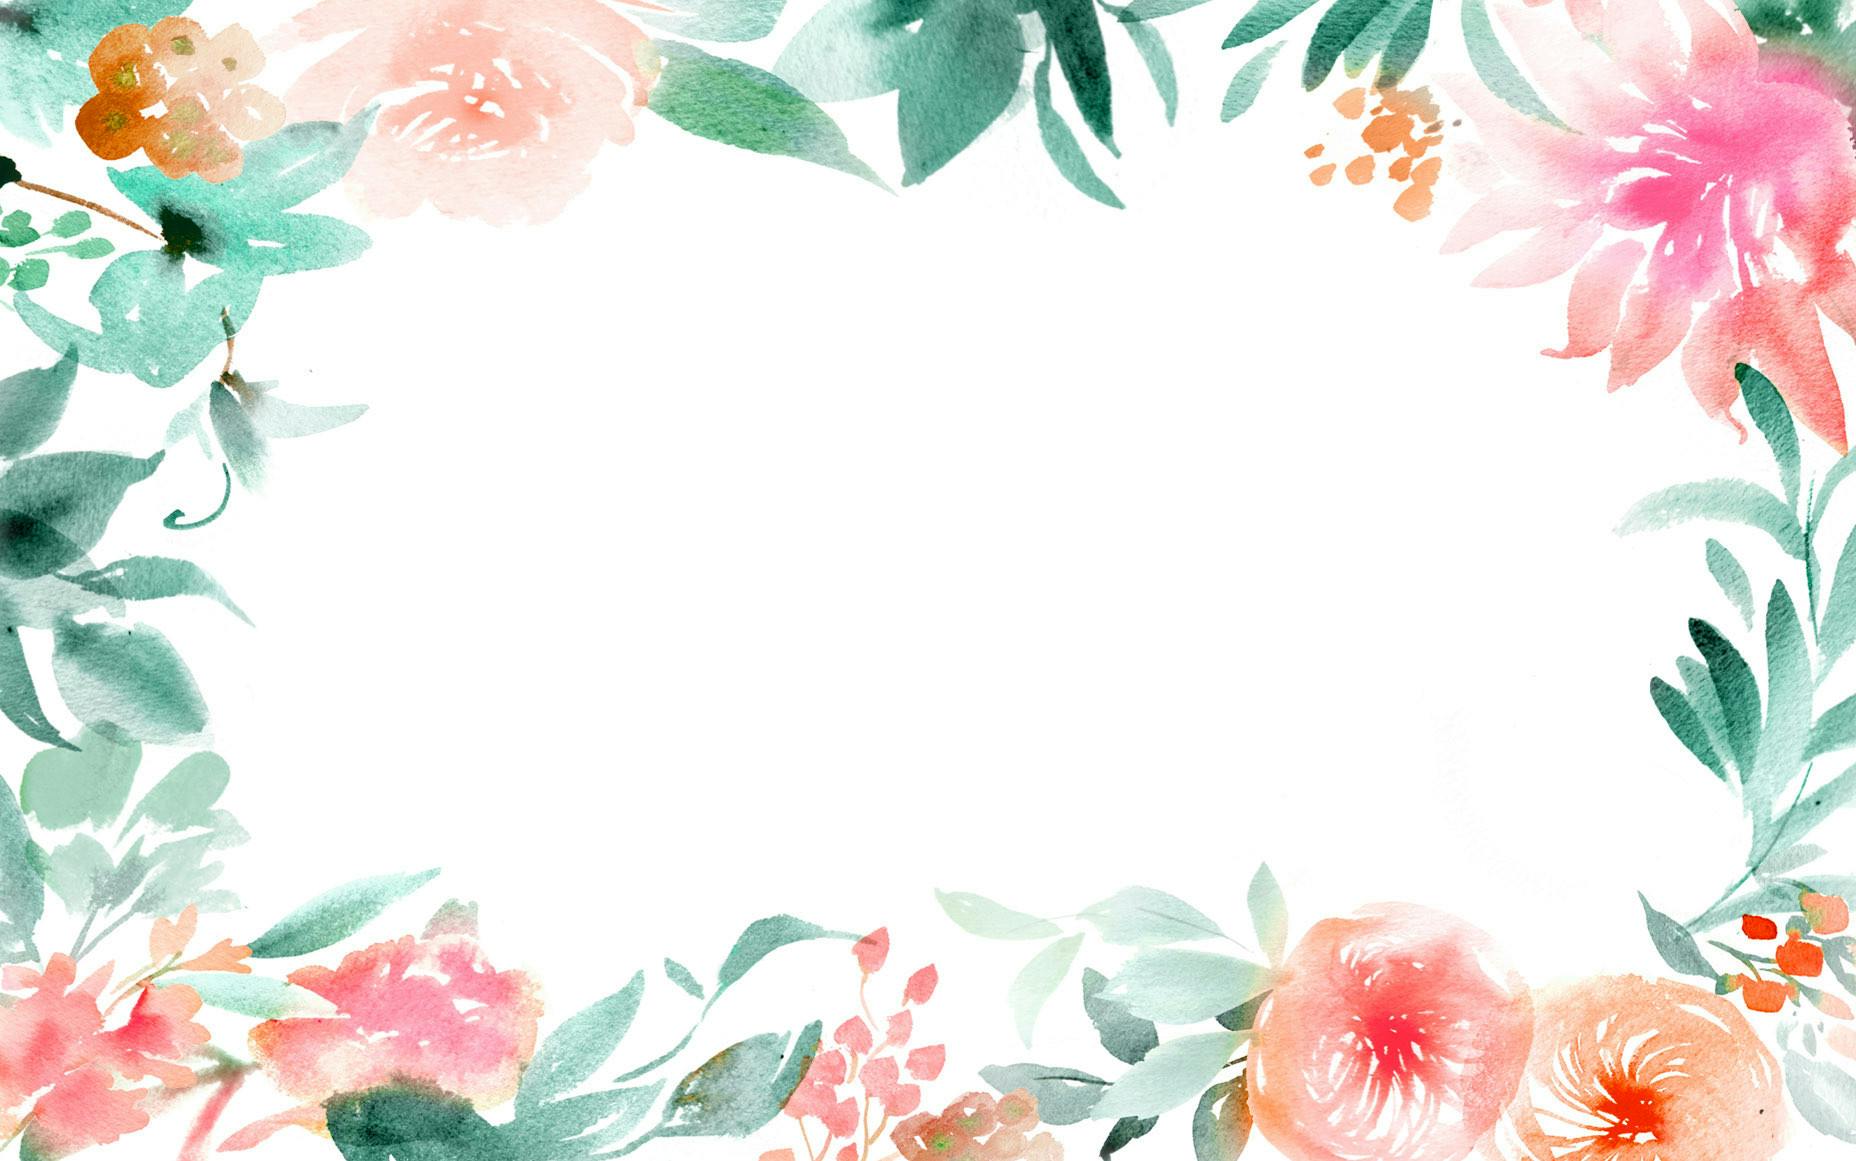 Watercolor Floral Border by Julie Song Ink1